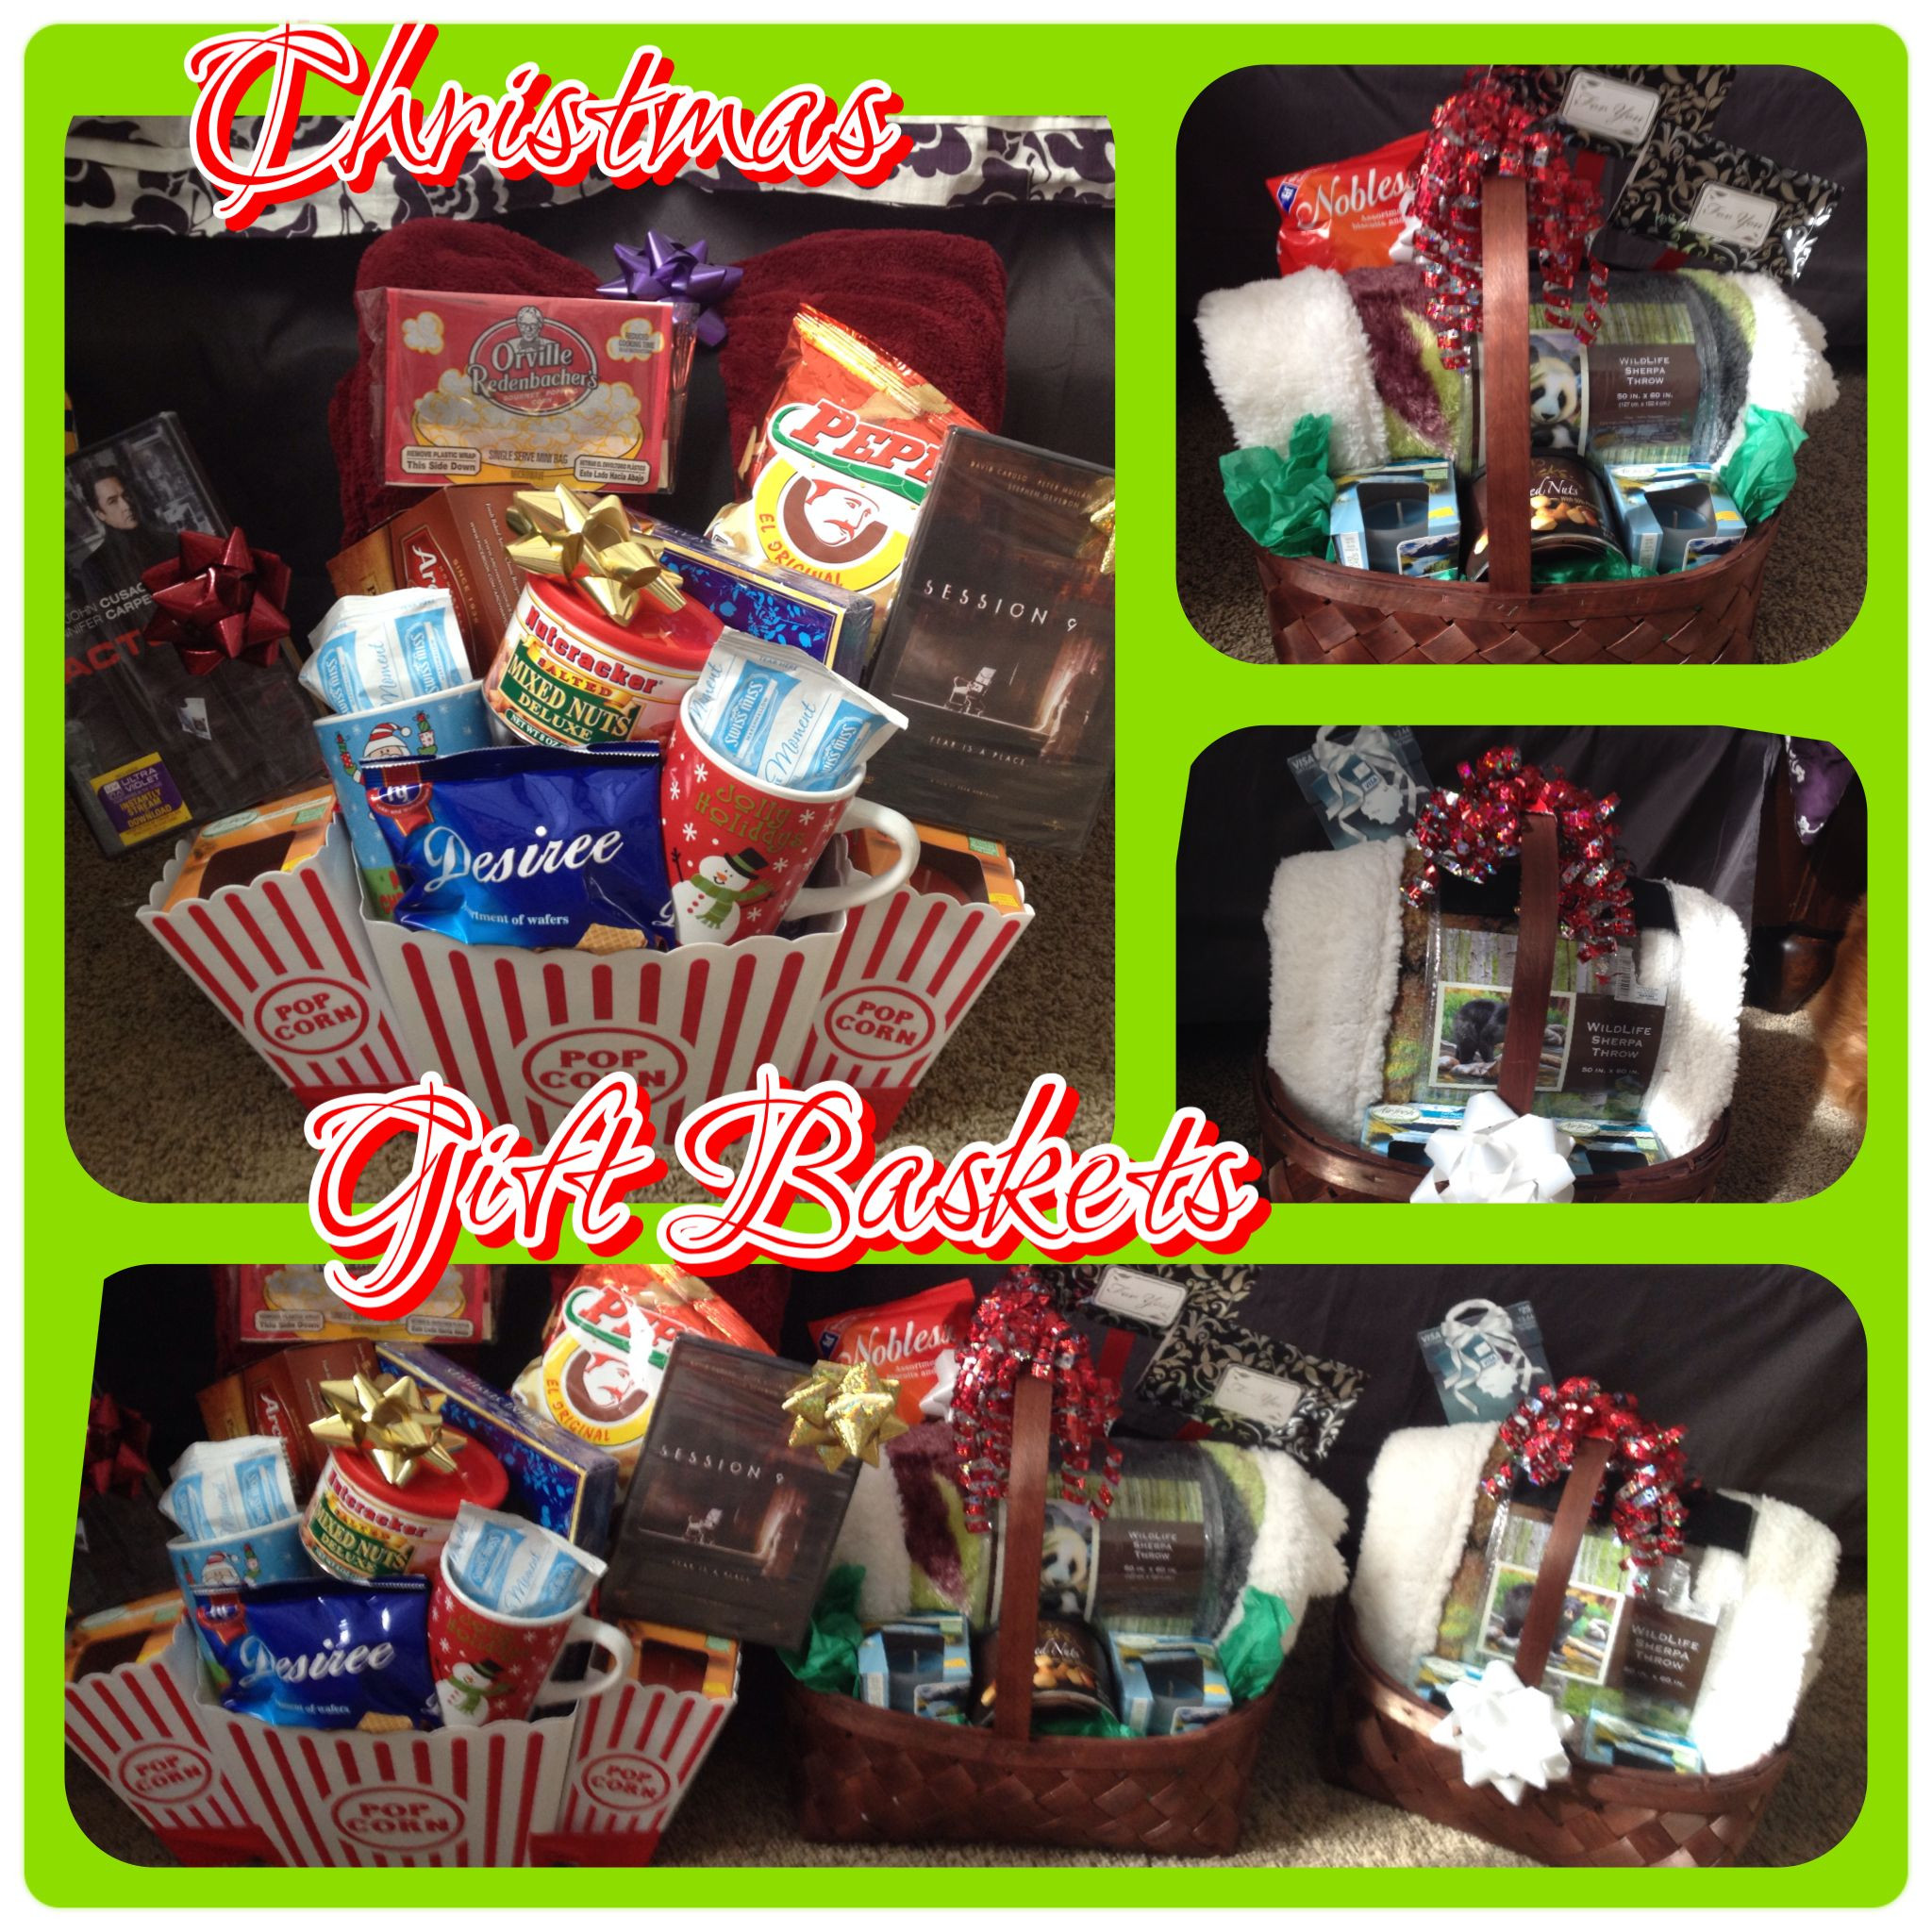 New Couples Gift Ideas
 Cozy date night t baskets